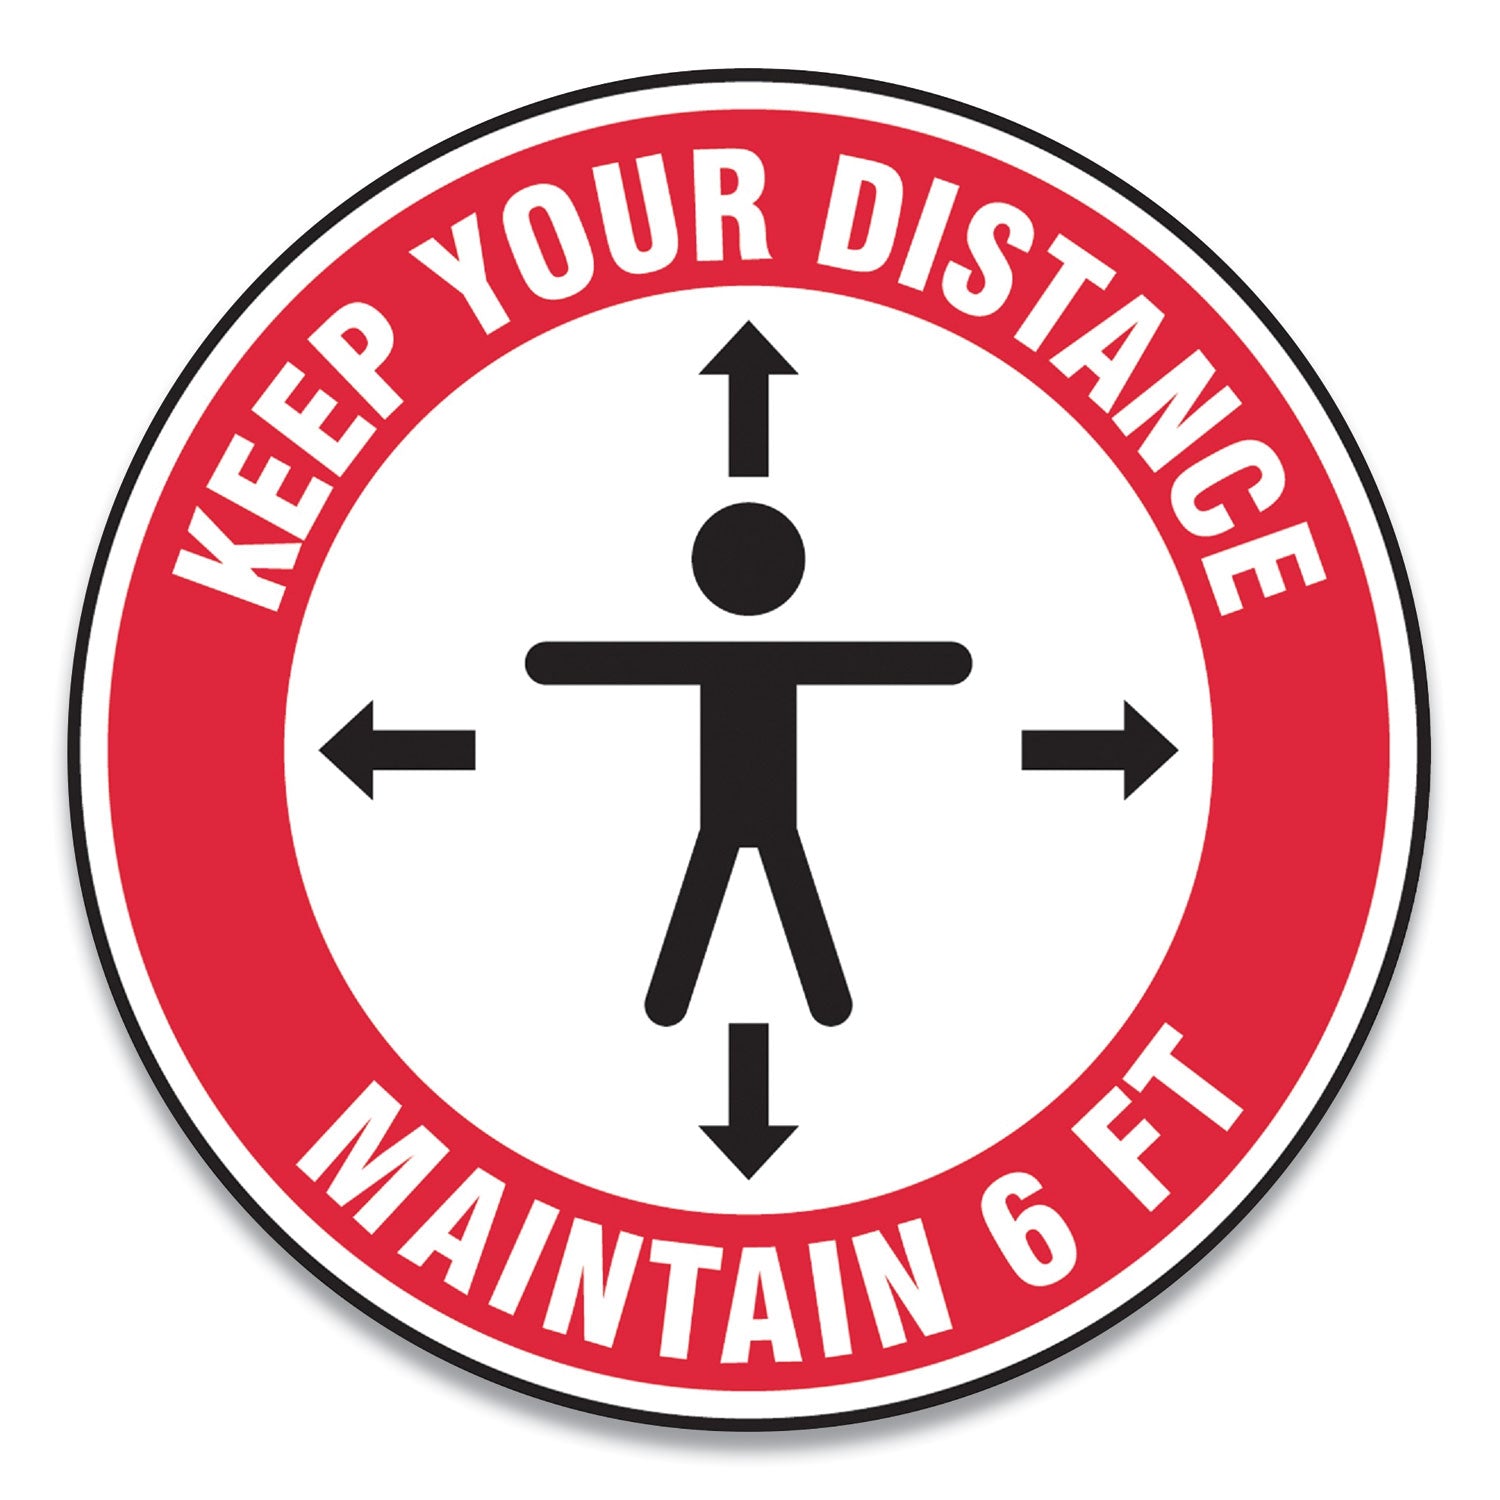 slip-gard-social-distance-floor-signs-12-circle-keep-your-distance-maintain-6-ft-human-arrows-red-white-25-pack_gn1mfs345esp - 1